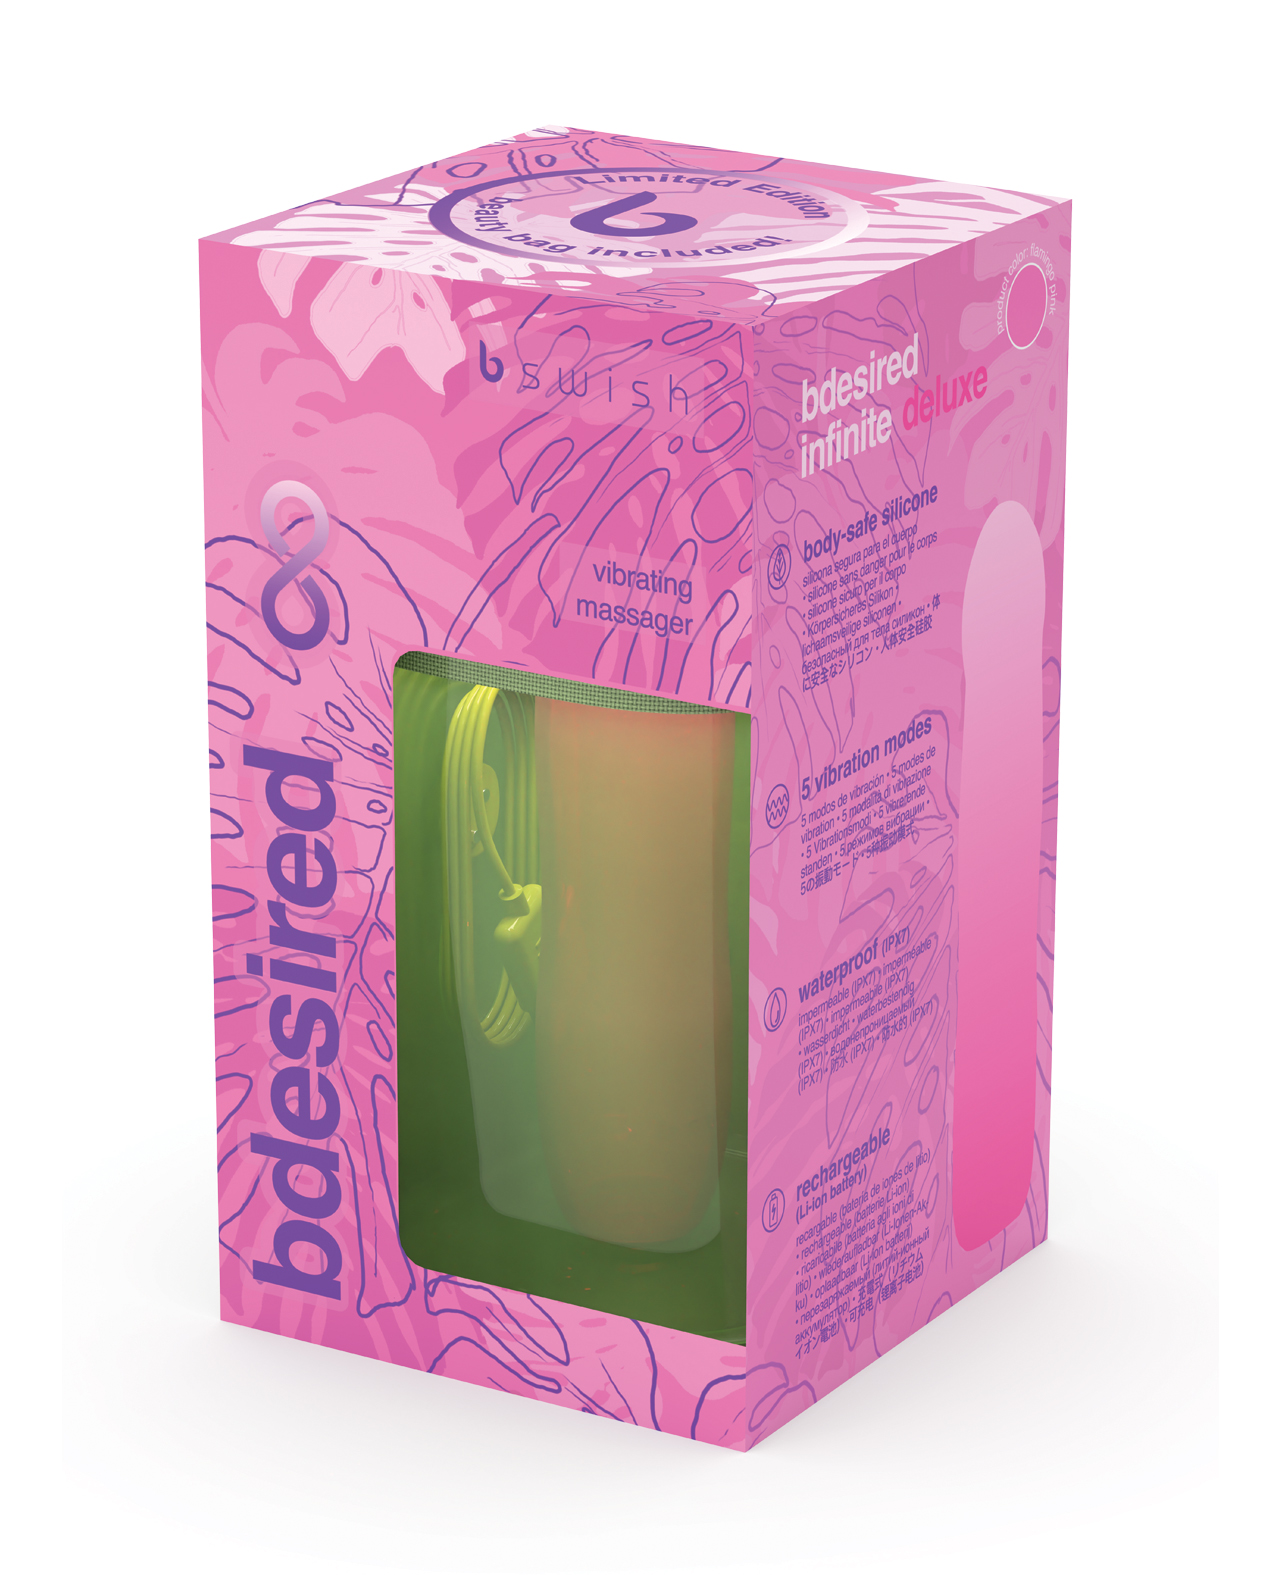 Bdesired Infinite Deluxe Limited Edition Flamingo Vibrator - Pink